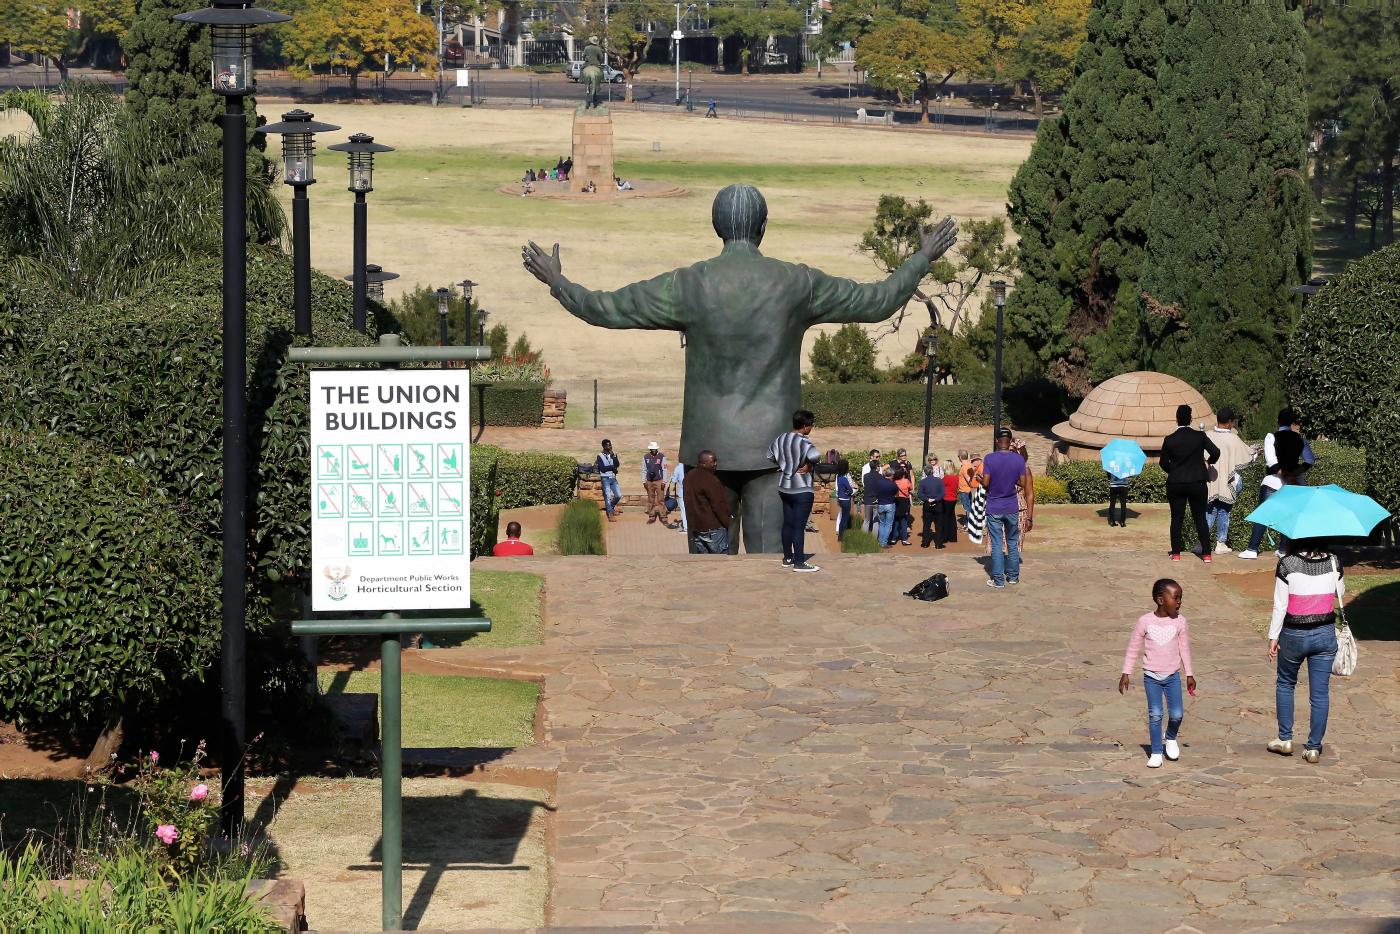 Nelson Mandela’s statue in front of the Union Buildings in Pretoria, seat of South Africa’s administration. Photo: Peter Kenny/WCC, 2017